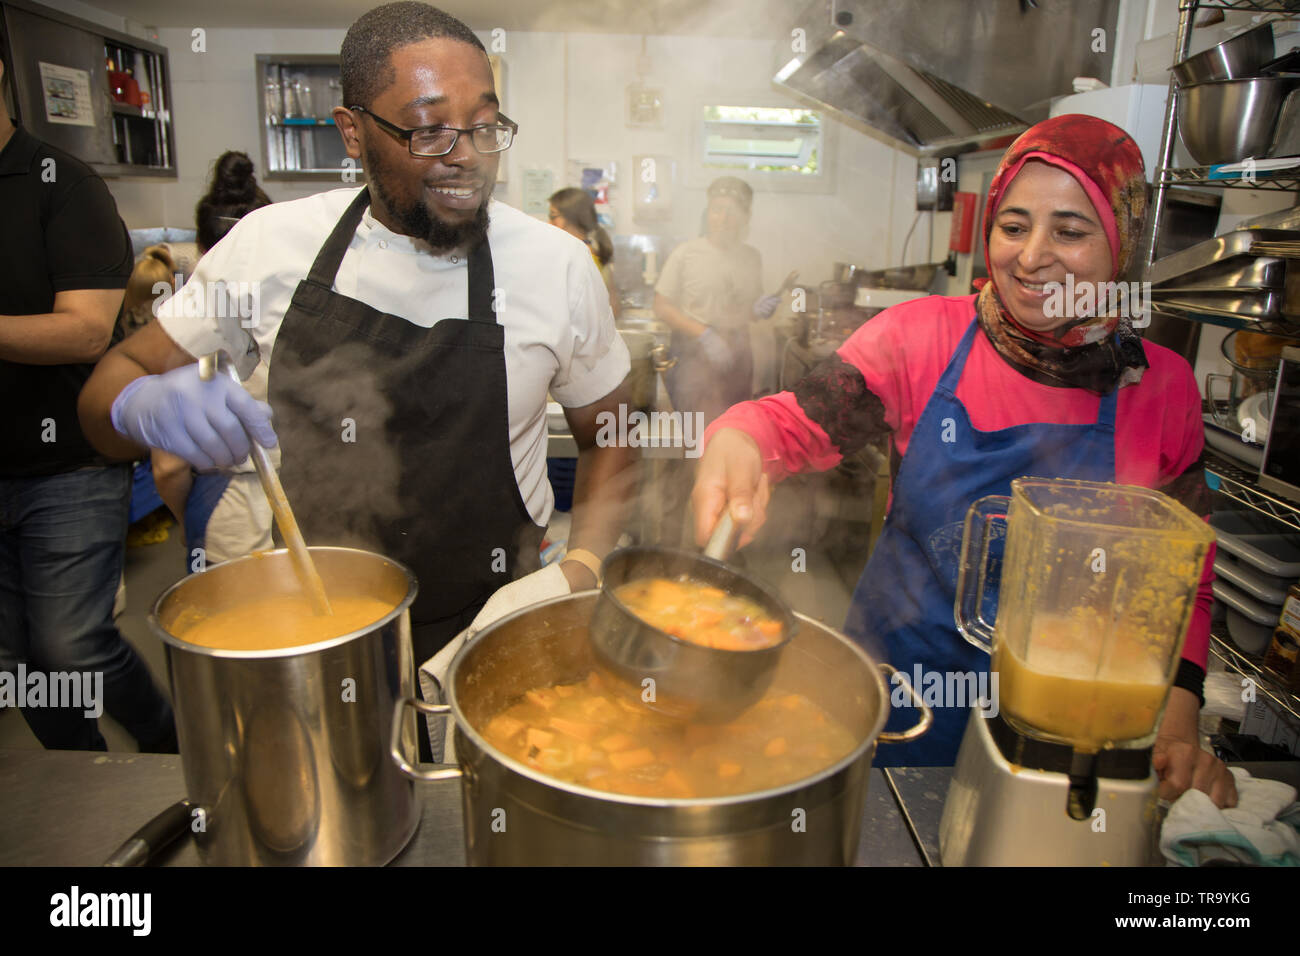 Volunteers at a community kitchen prepare a meal for diners in need. Stock Photo